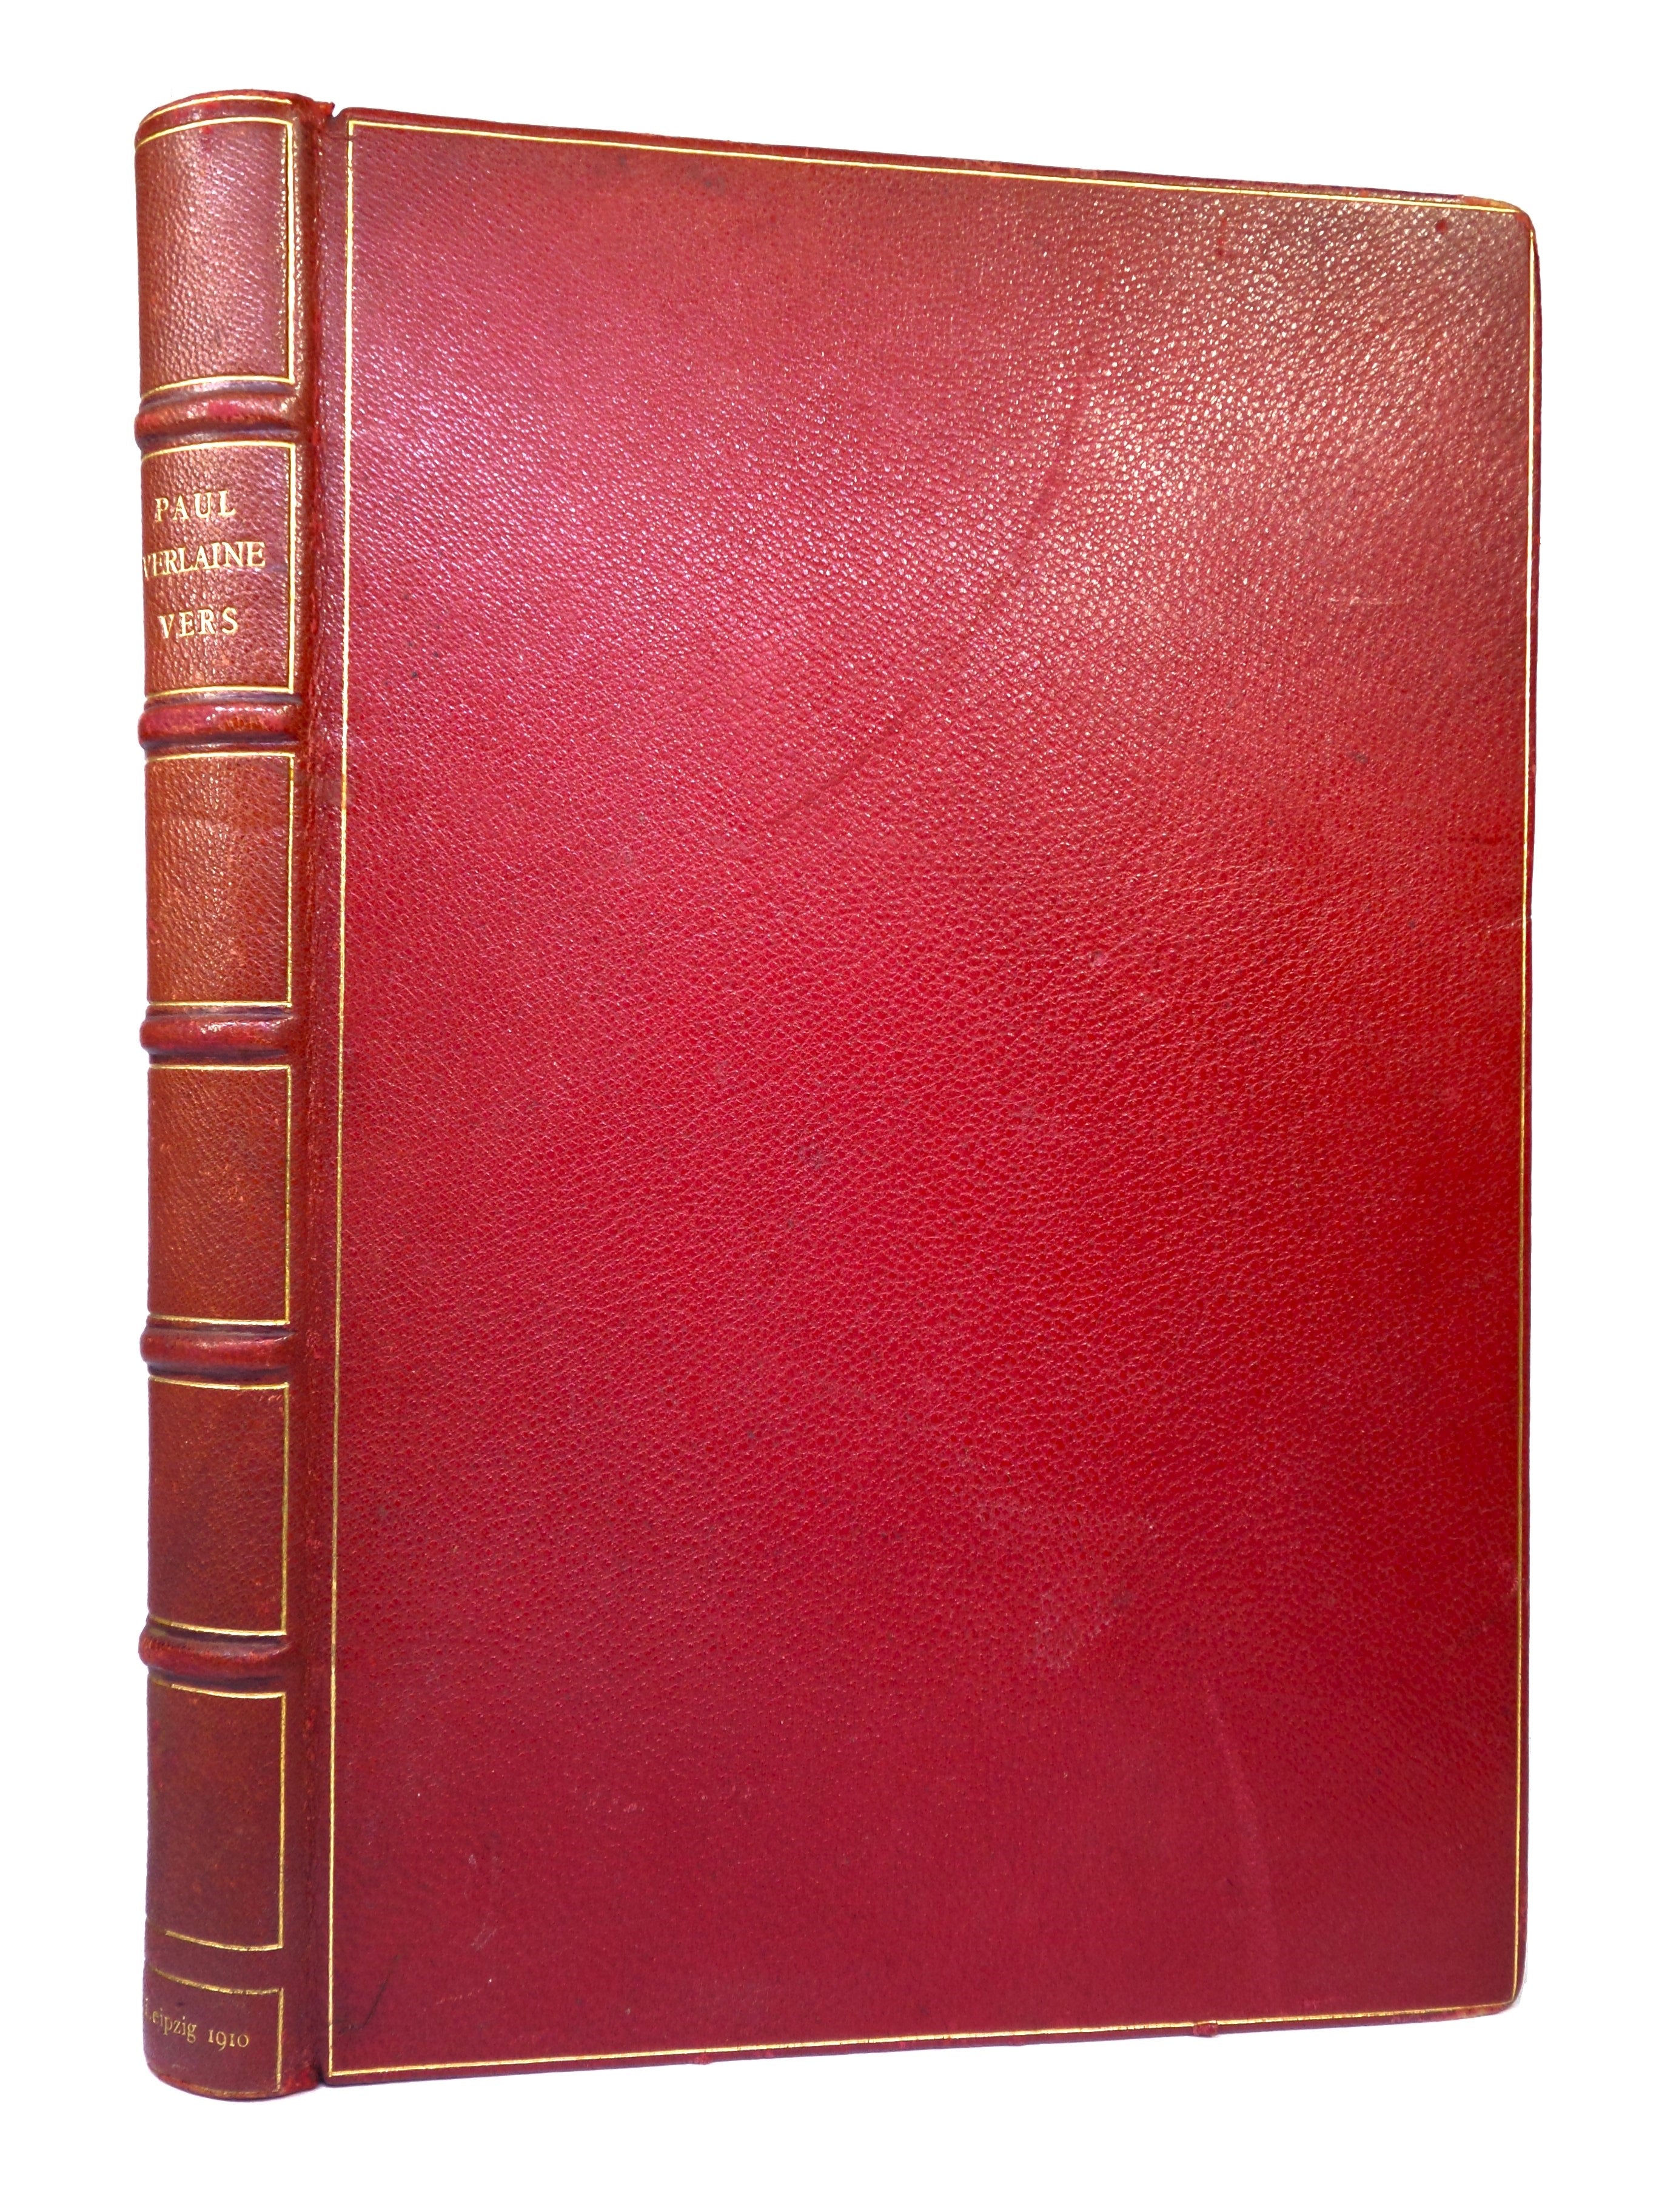 VERS BY PAUL VERLAINE 1910 FINELY BOUND BY CARL SONNTAG